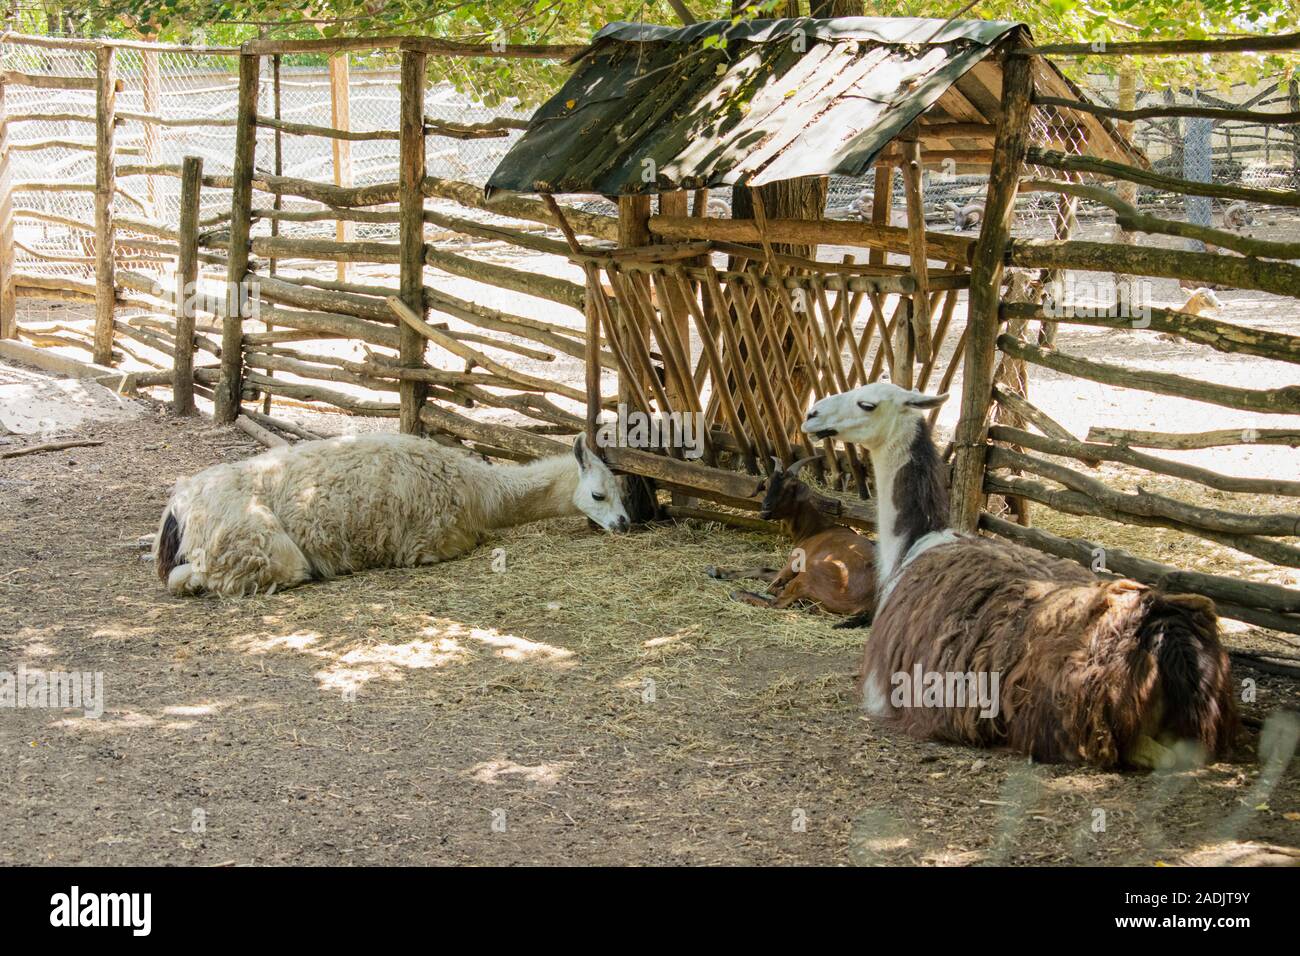 Llamas relaxing in the shadows during the Europe heatwave. Stock Photo